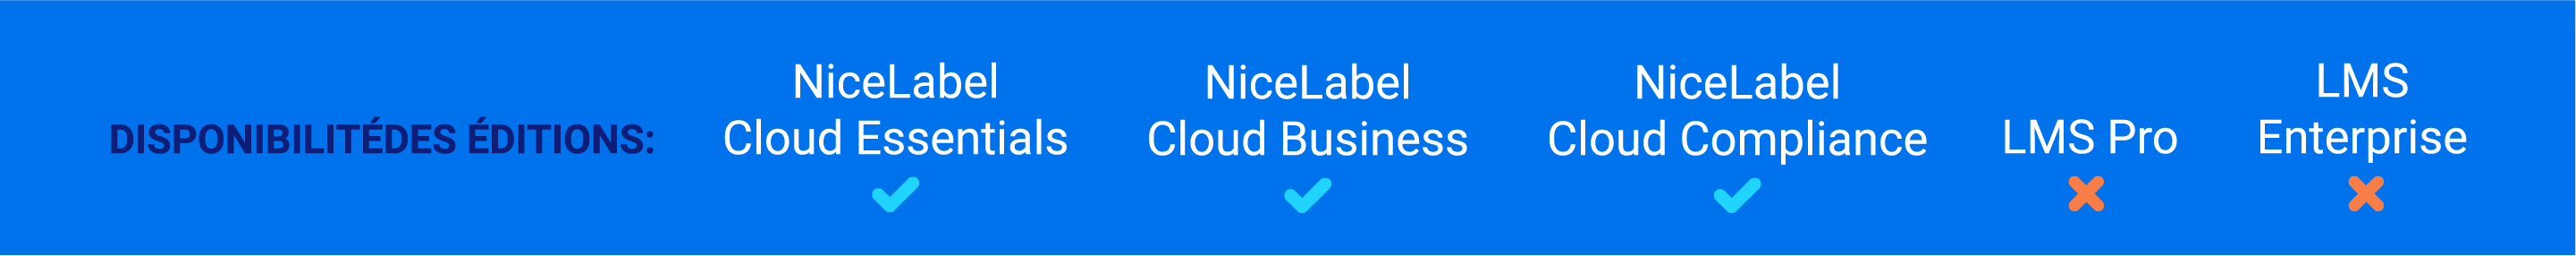 NLCEssentials-NLCBussines-NLCCompliance